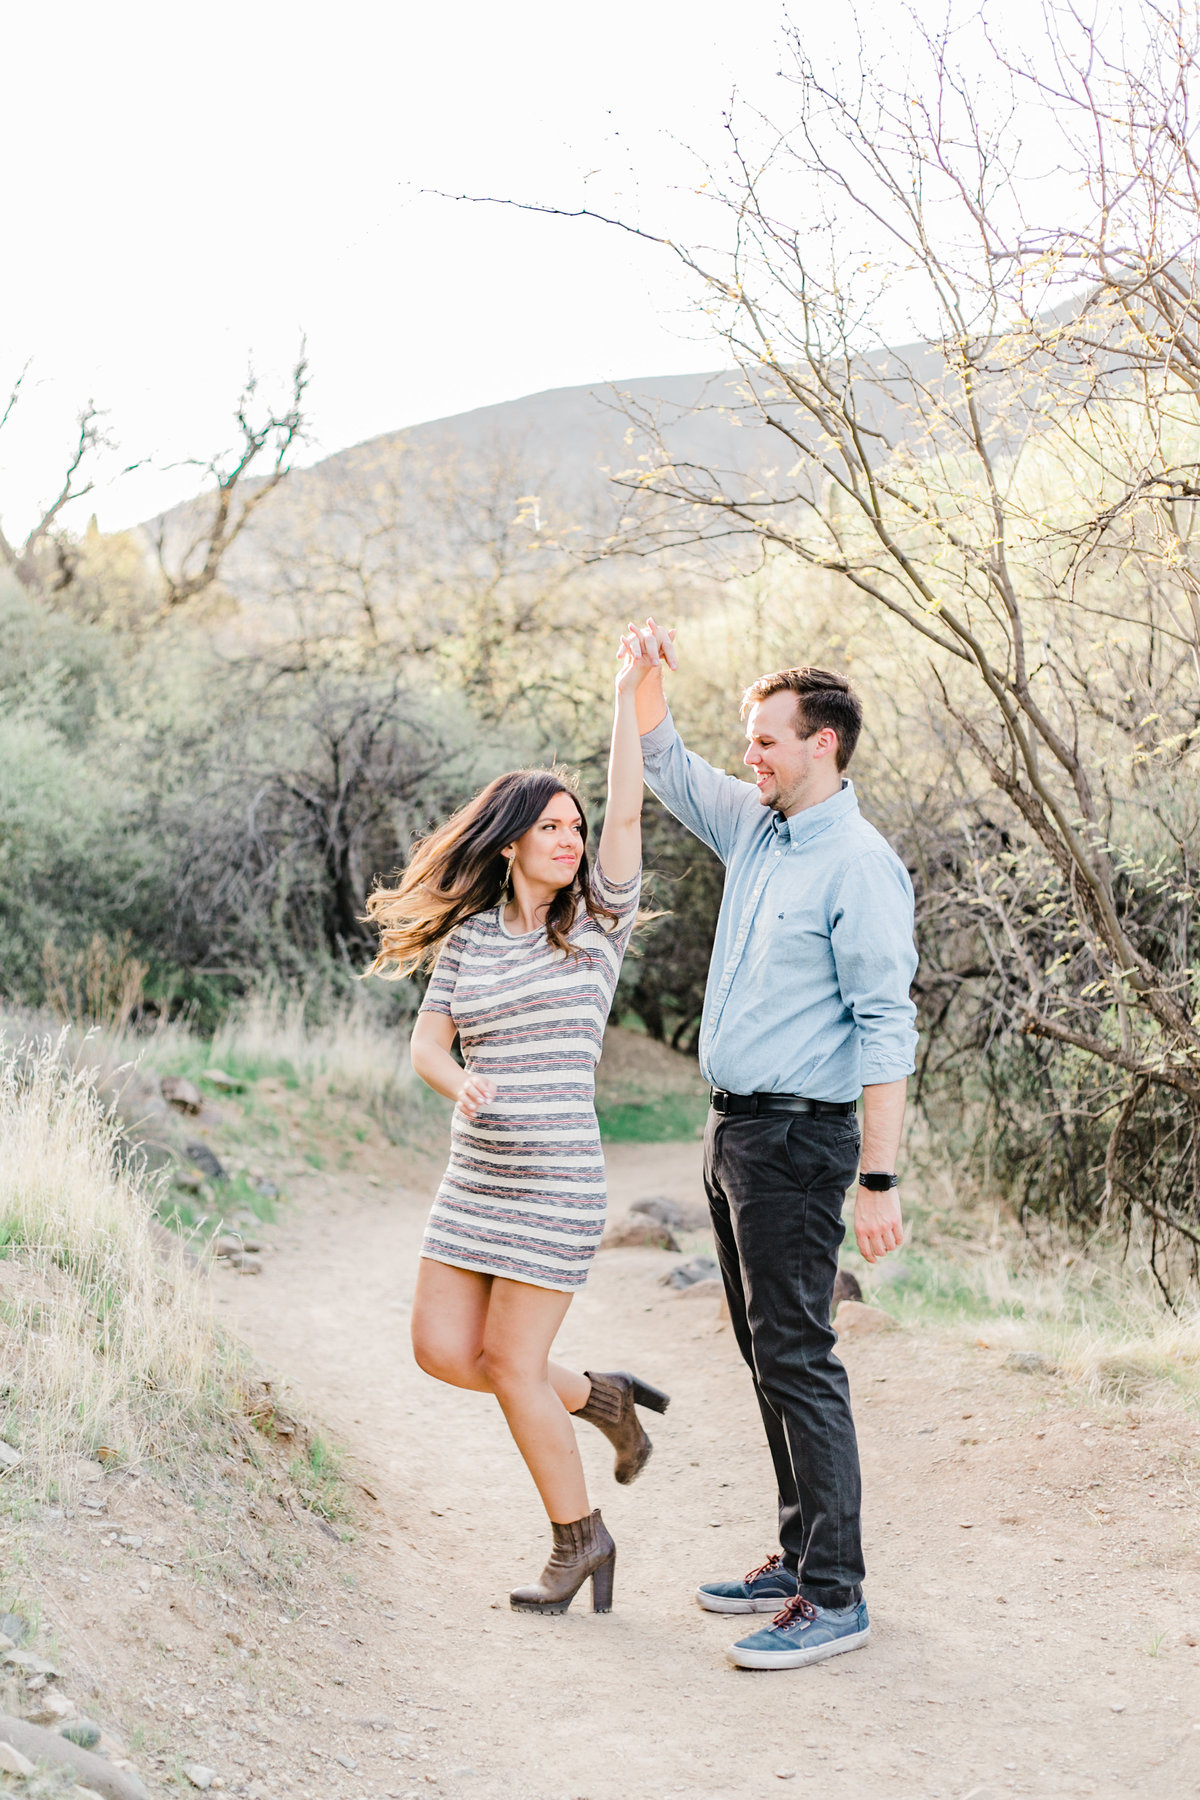 Karlie Colleen Photography - Claire & PJ - Engagement Session-231